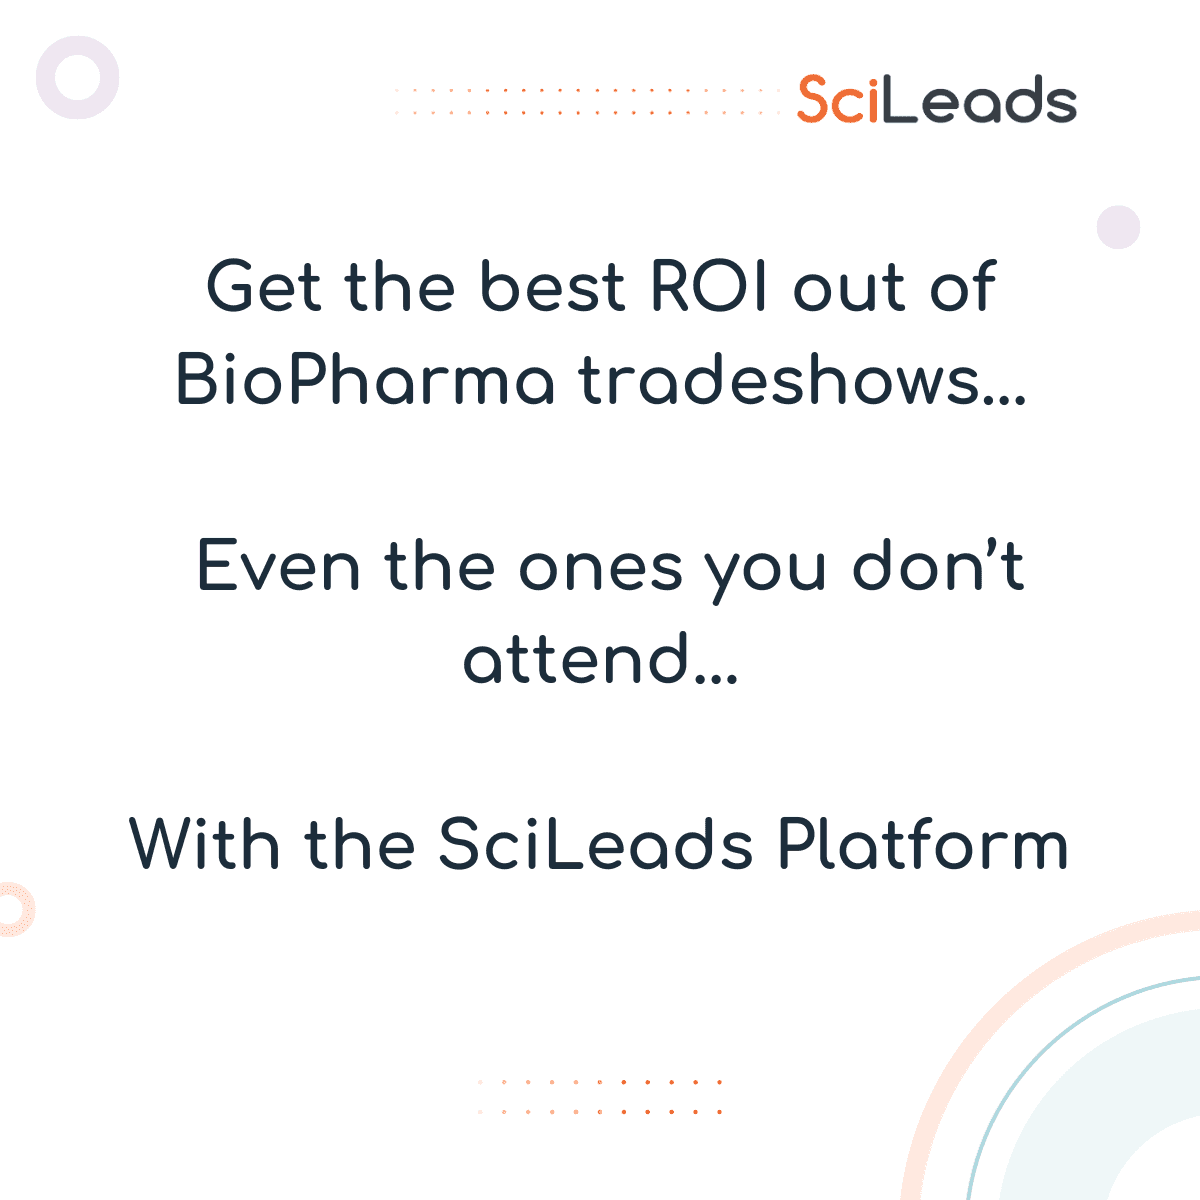 Making the Most of your Tradeshows with SciLeads